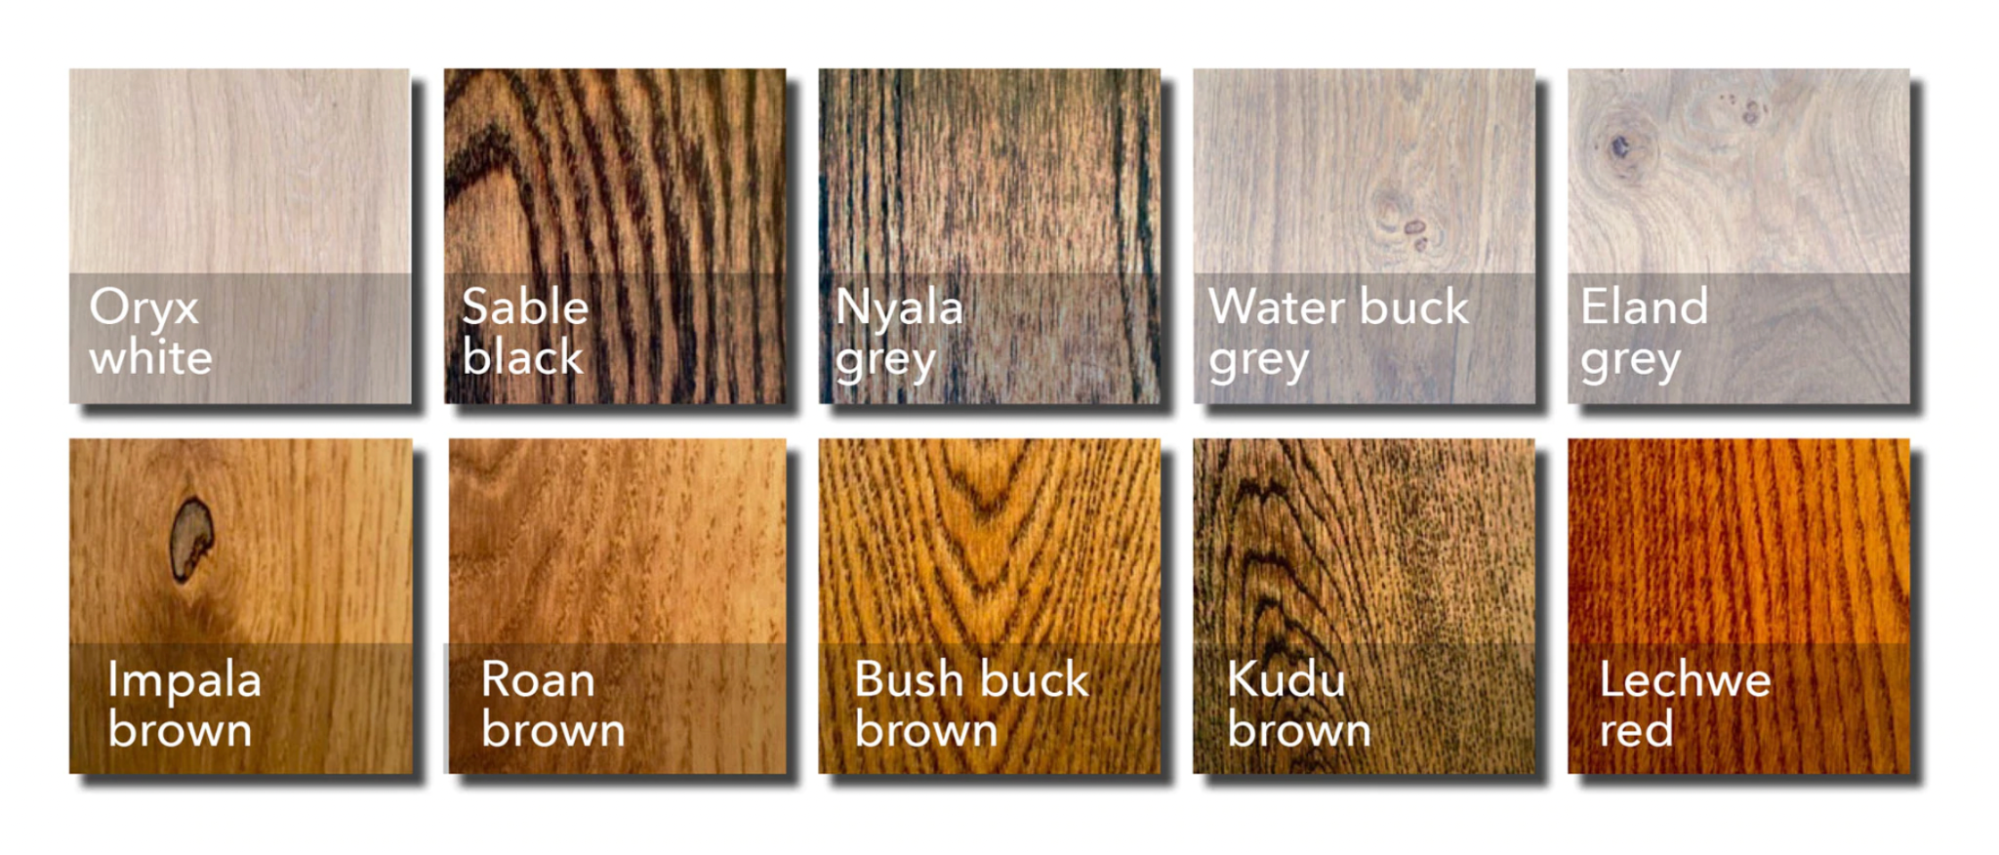 Natural Raw Colour Timber Flooring Stains from Whittle Waxes.